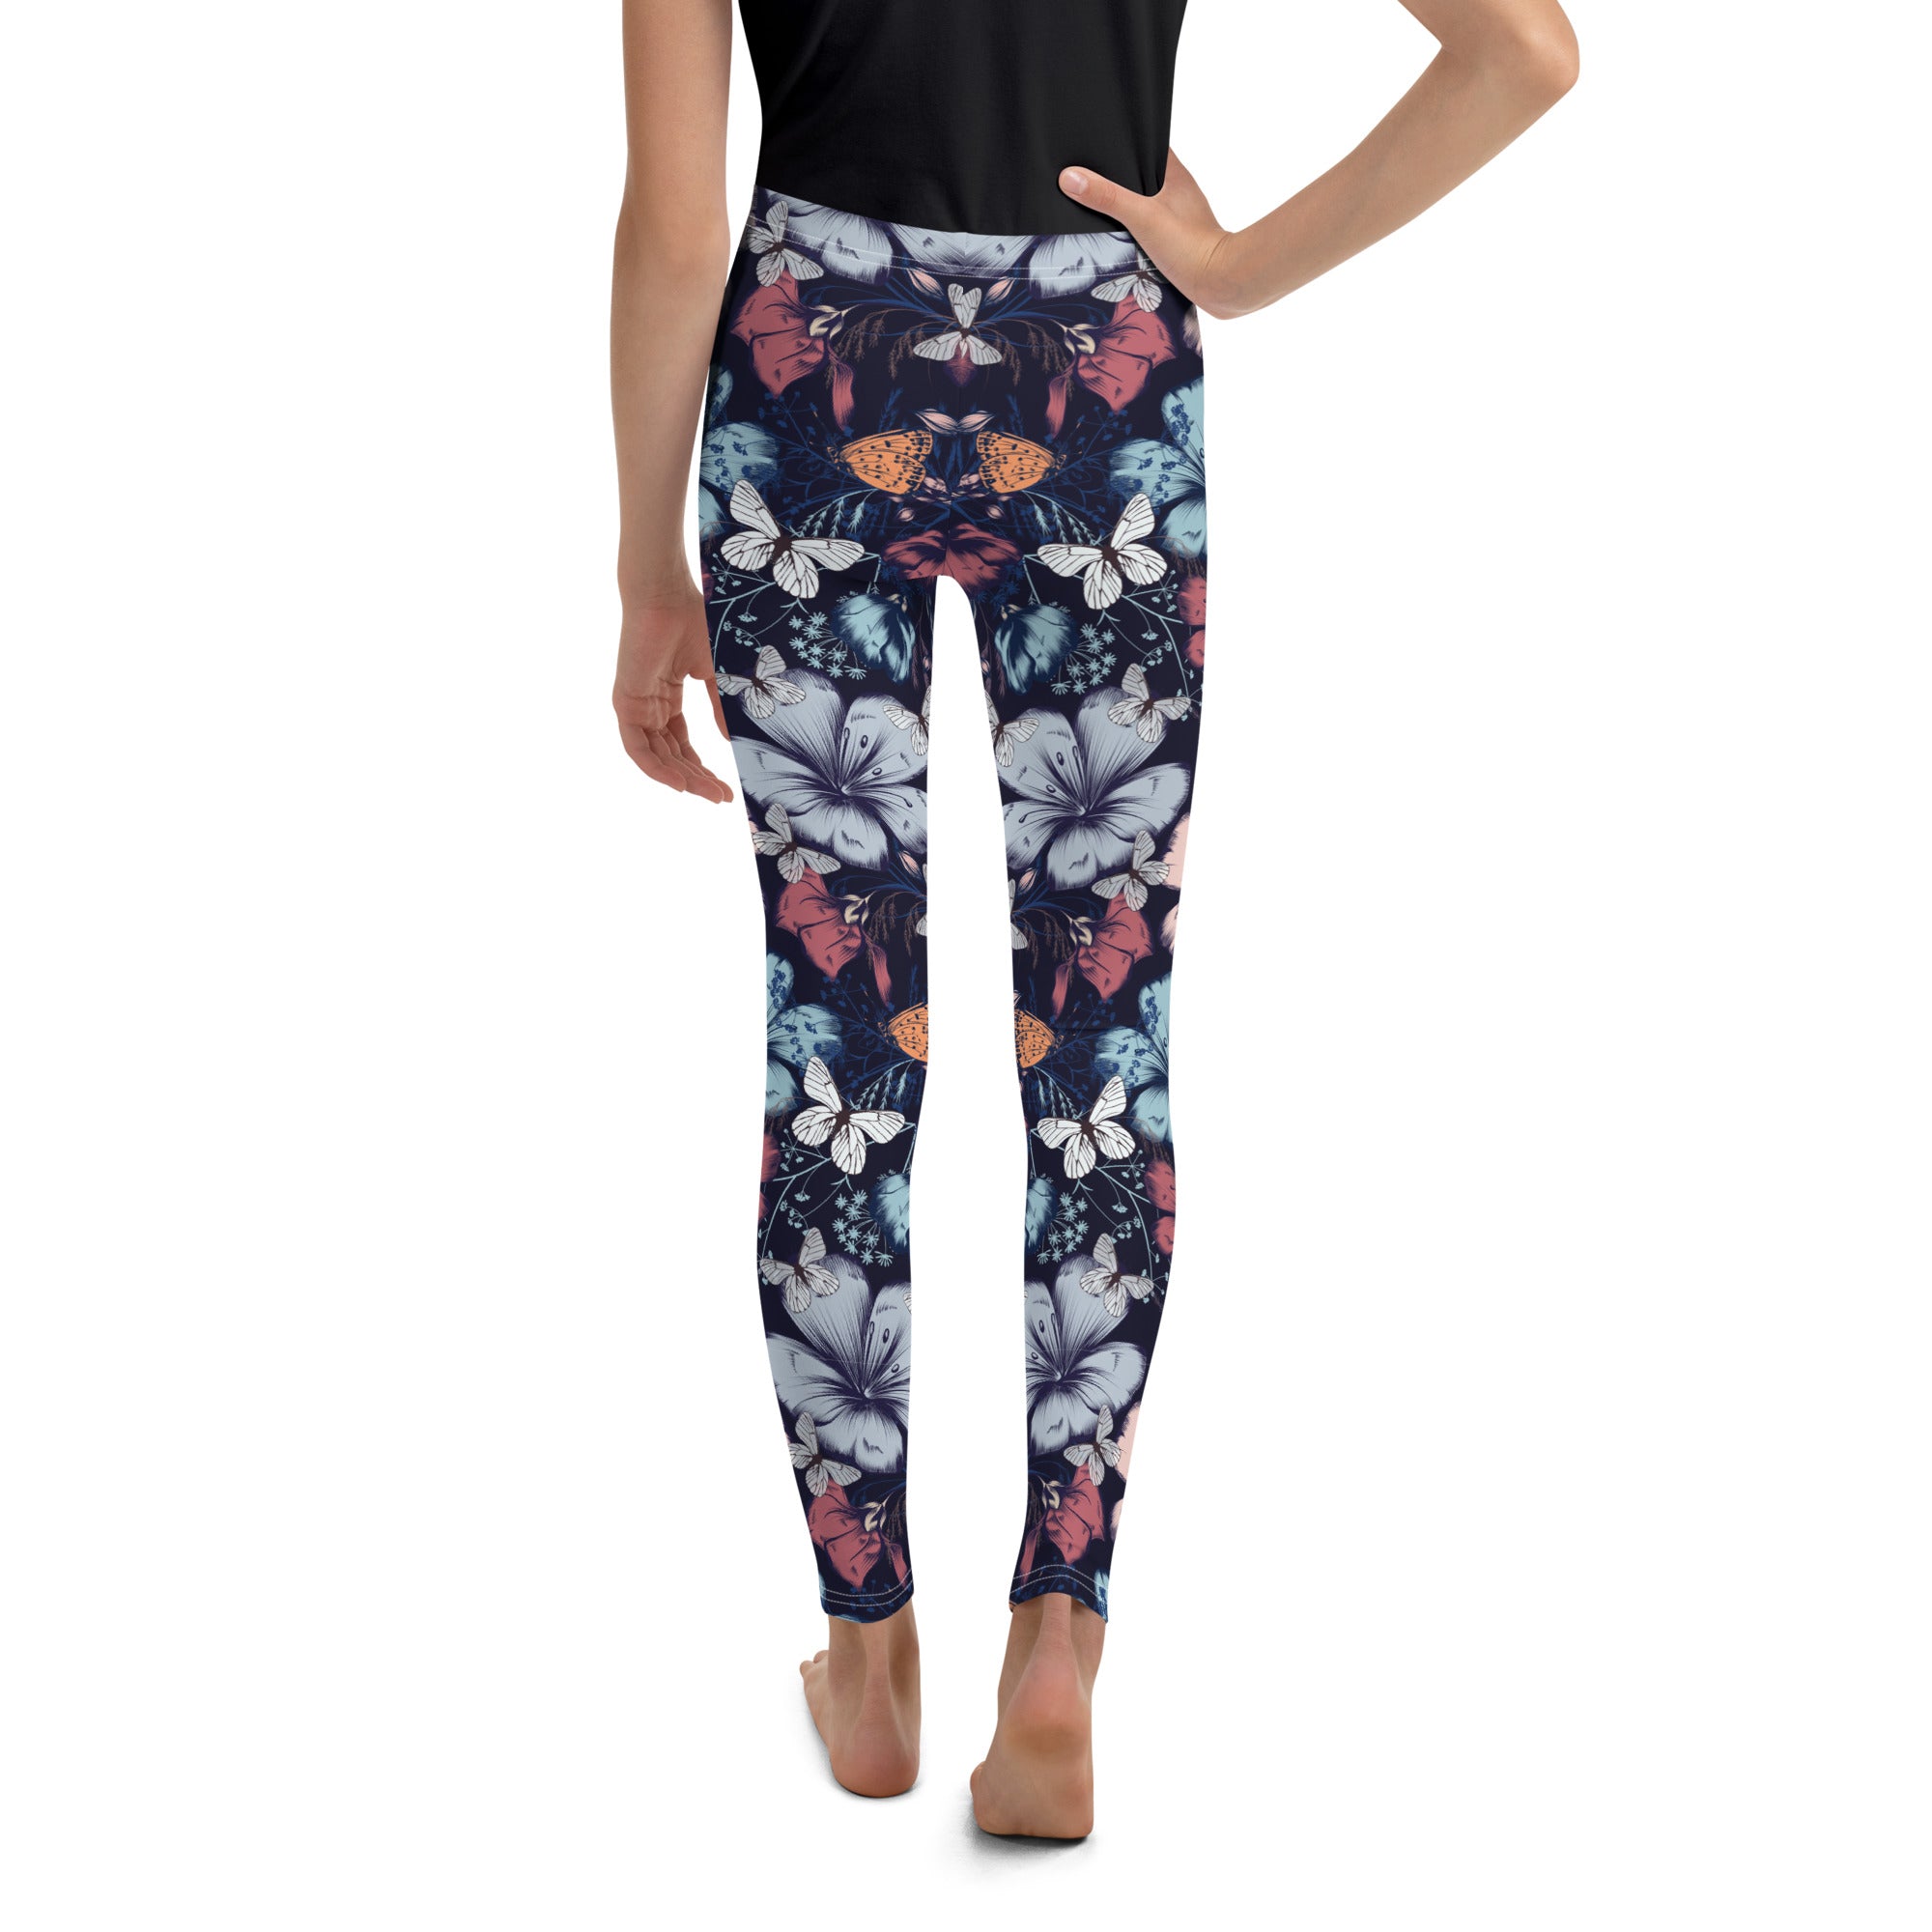 Youth Leggings- BUTTERFLY GARDEN VINTAGE STYLE